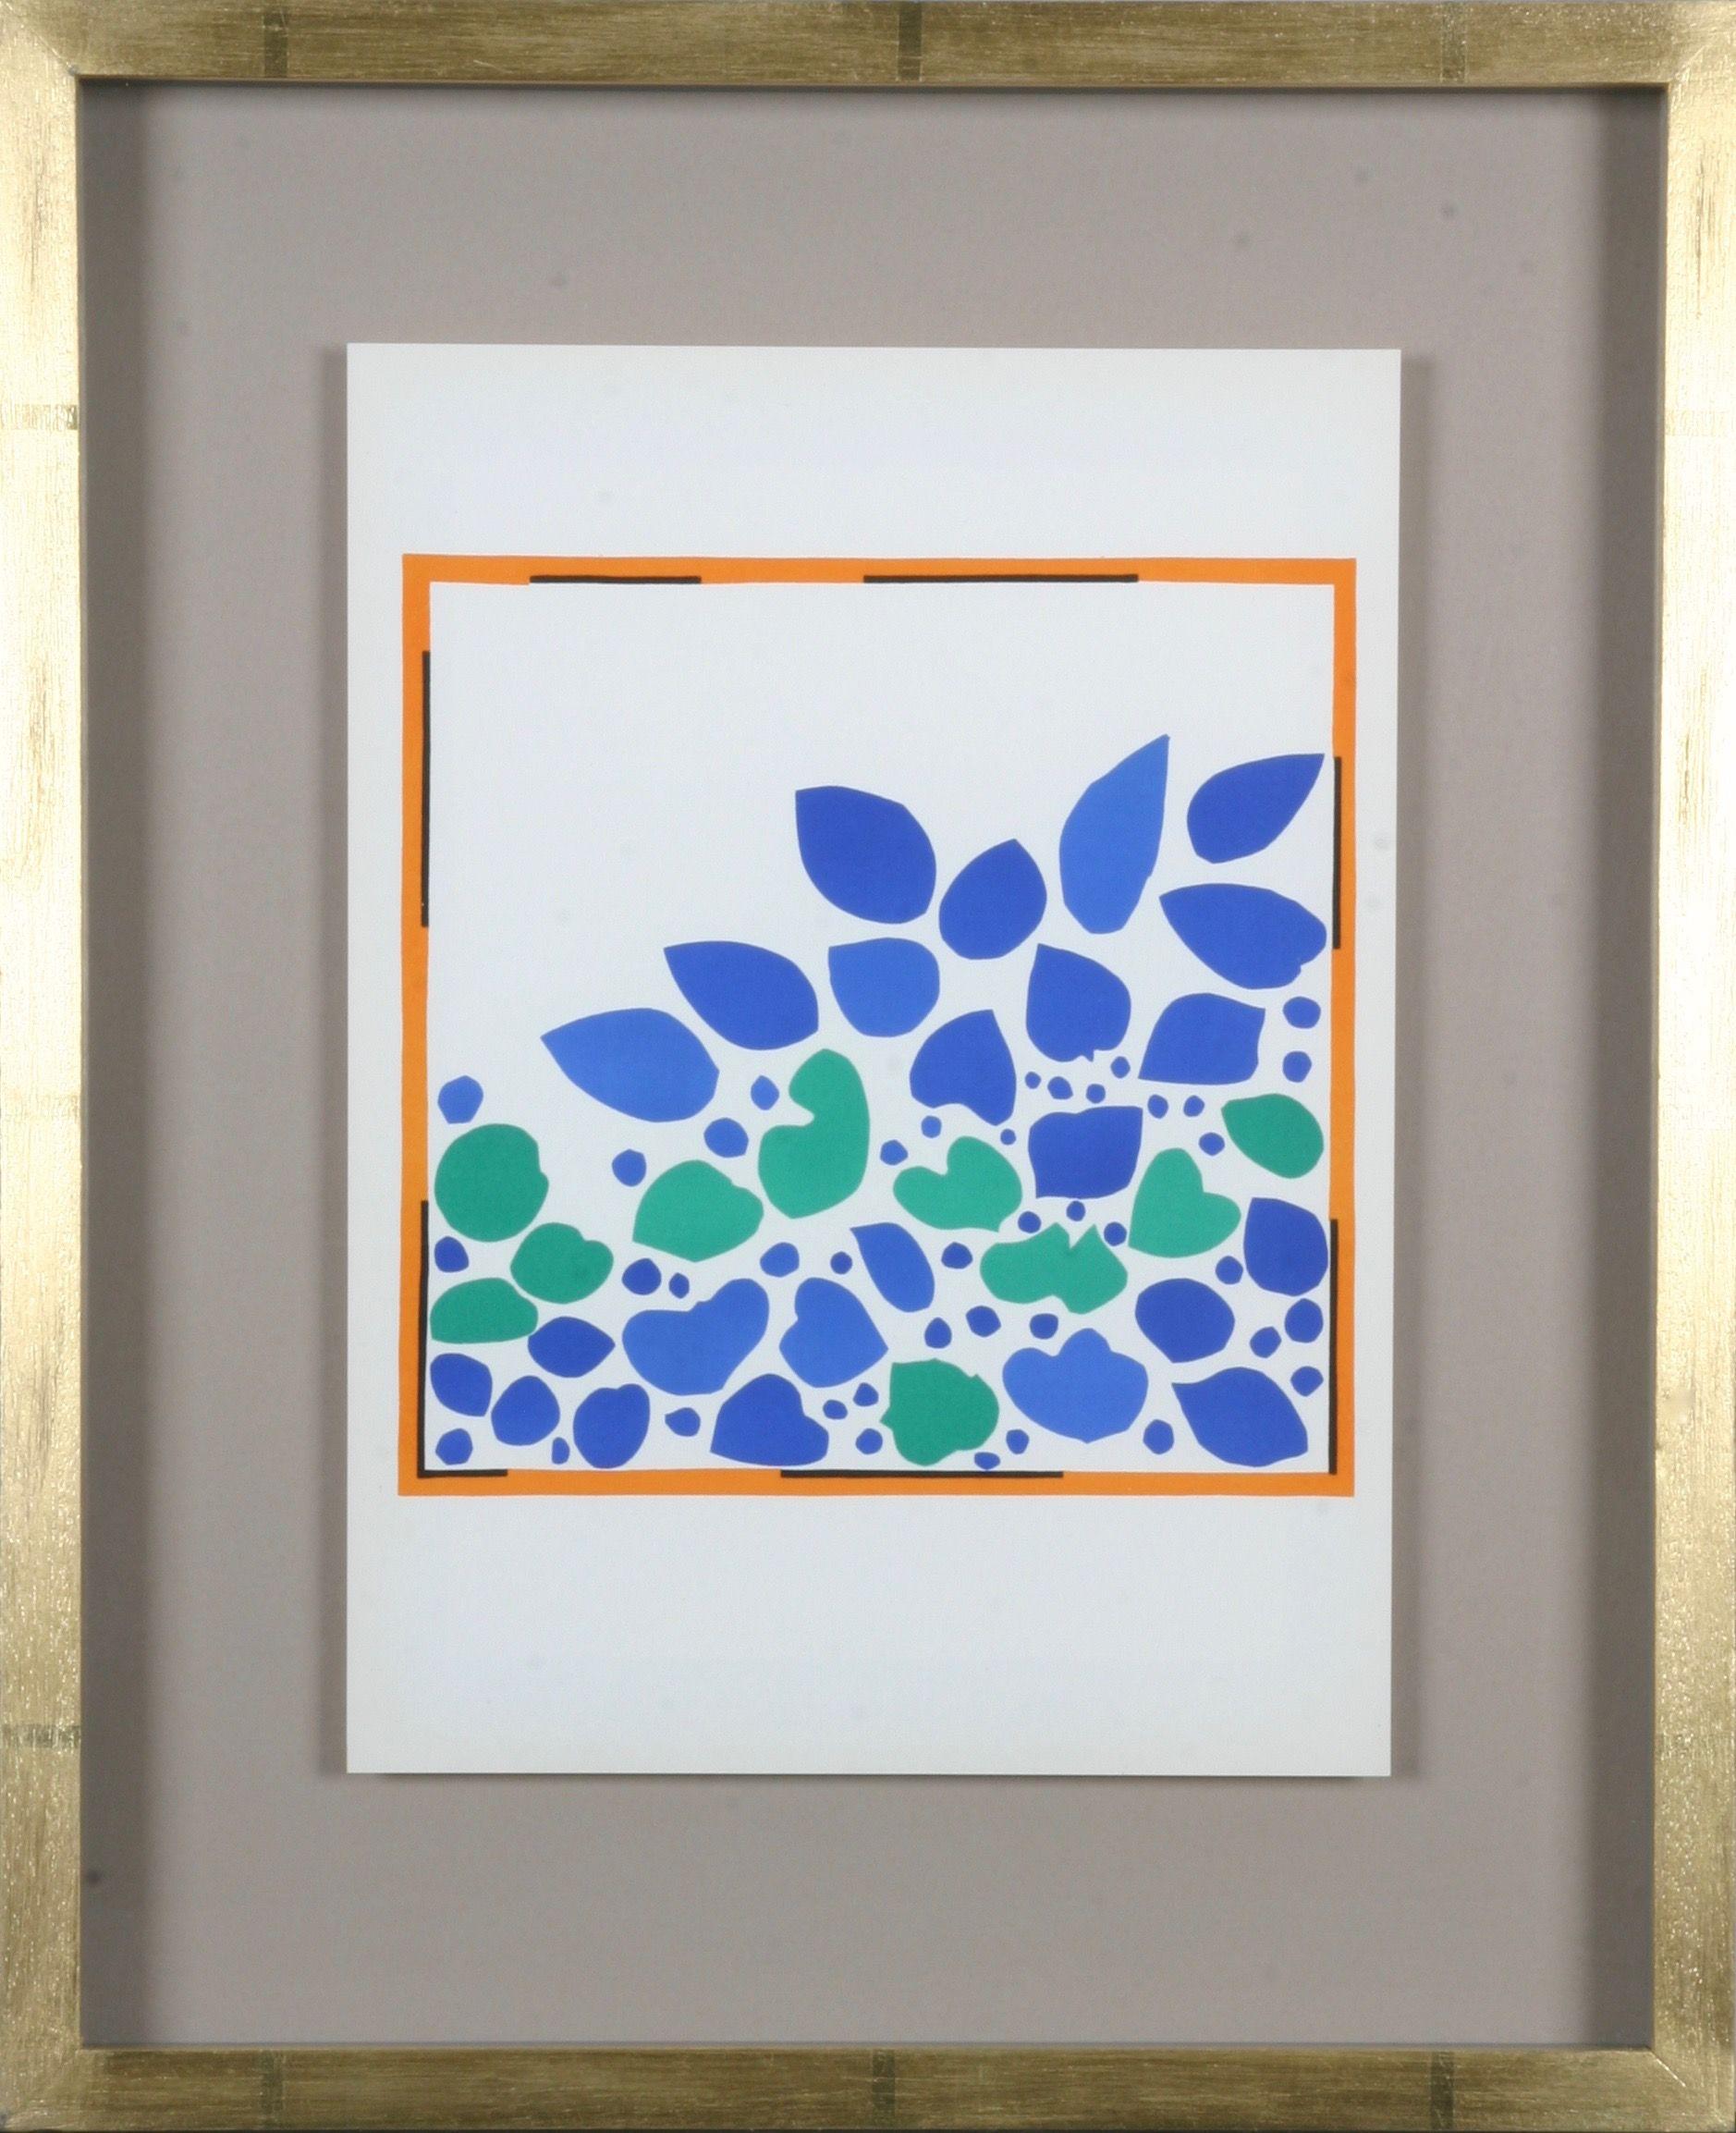 How many cut-outs did Matisse make?